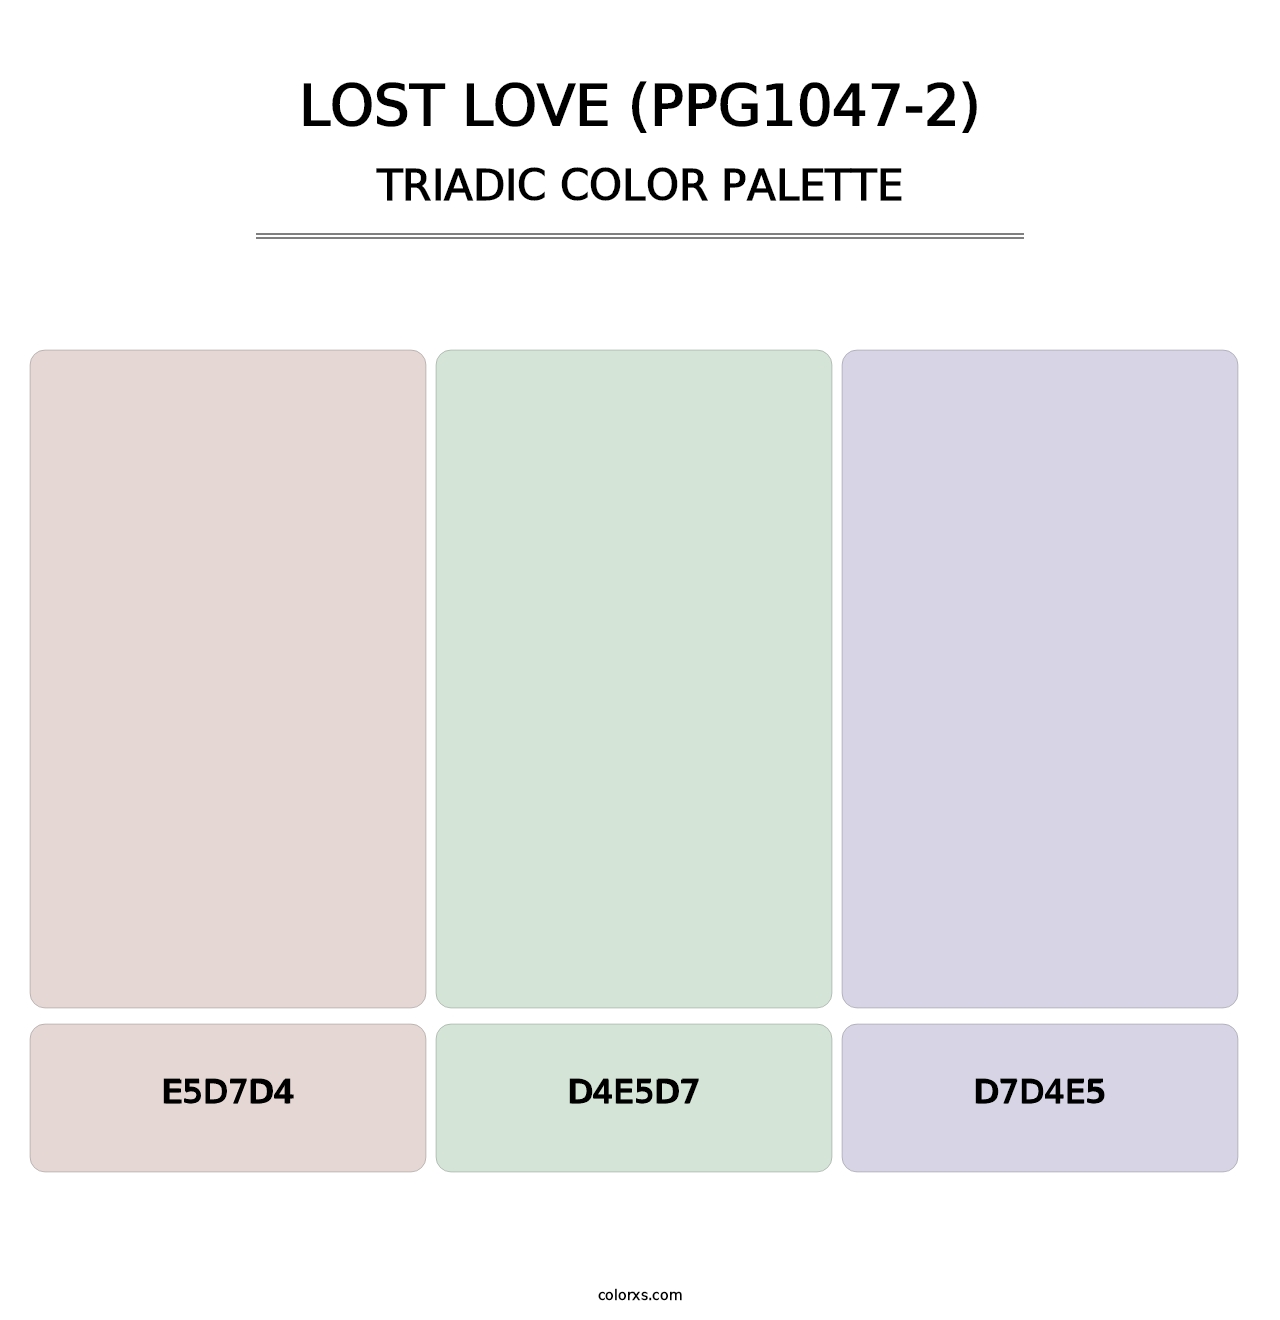 Lost Love (PPG1047-2) - Triadic Color Palette